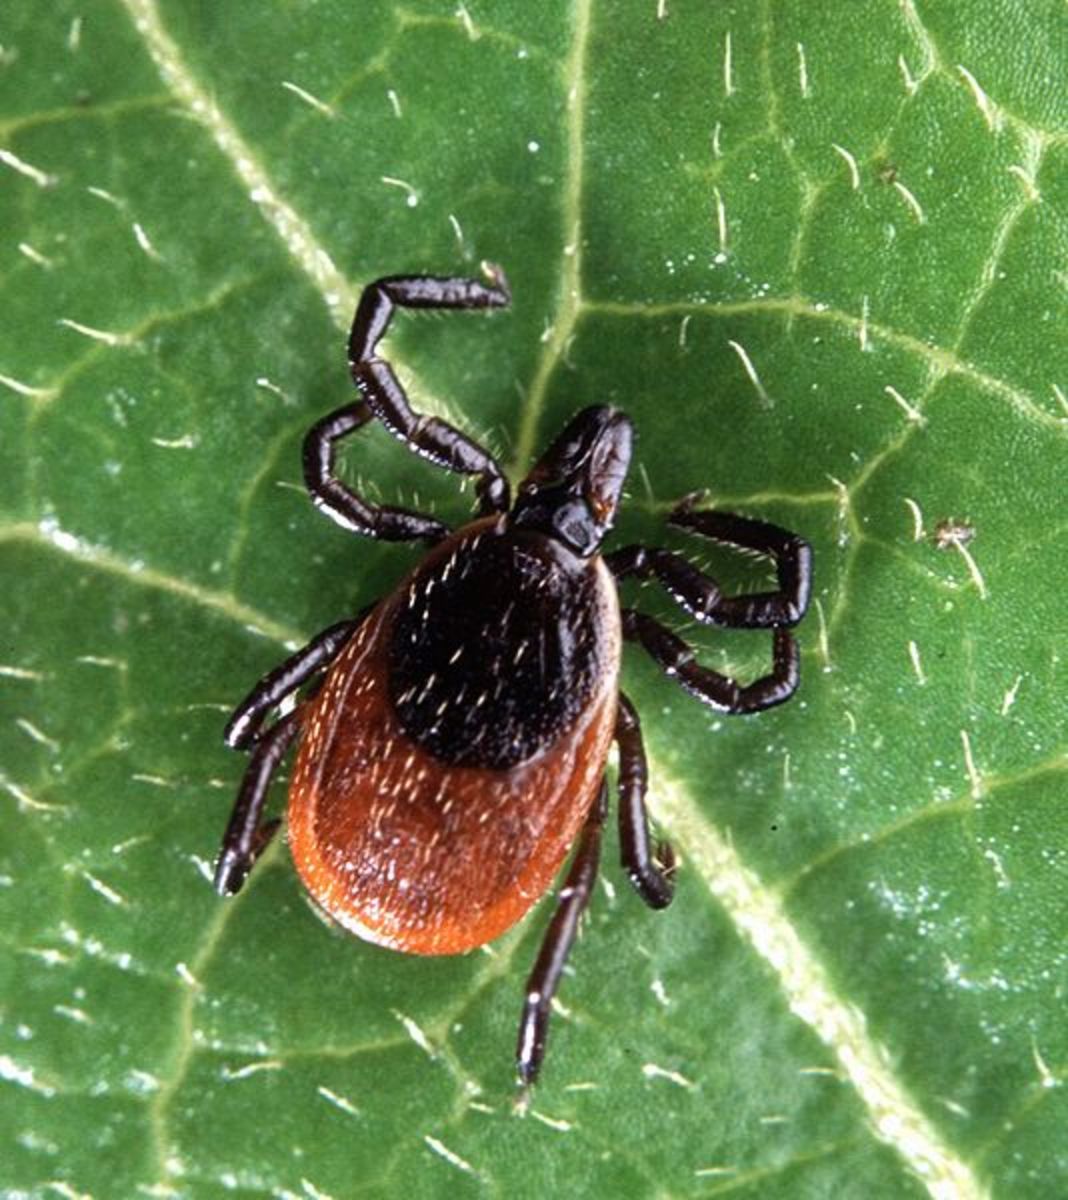 The Black-legged Tick does not limit its meals to larger mammals. It will also feed on mice, lizards and birds, especially in the nymph and larval stages.